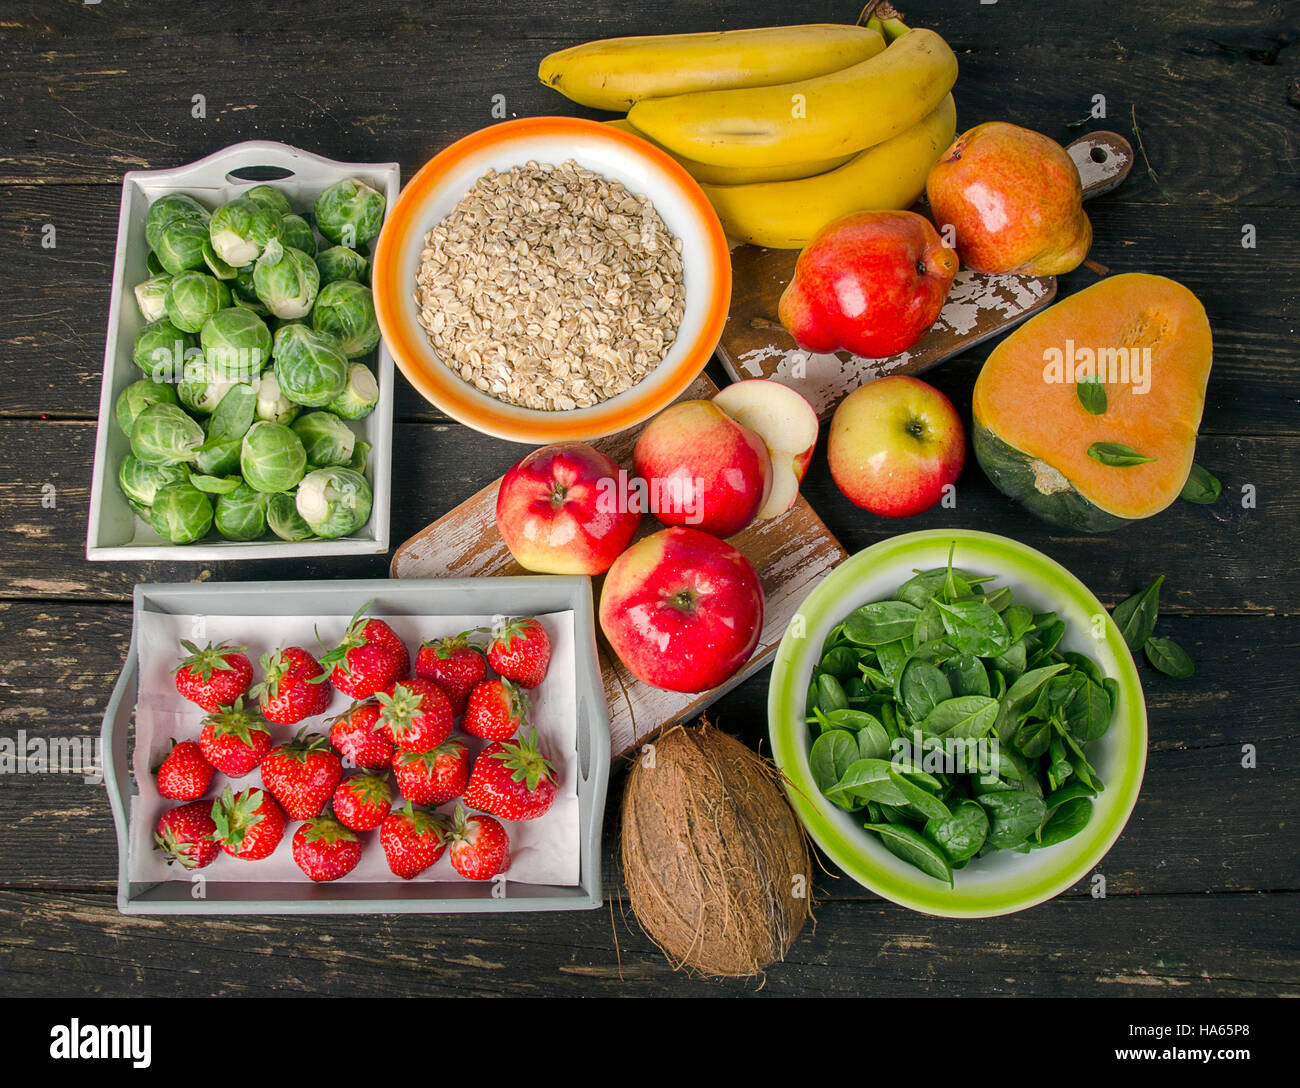 High Fiber Foods on a wooden table. Top view Stock Photo